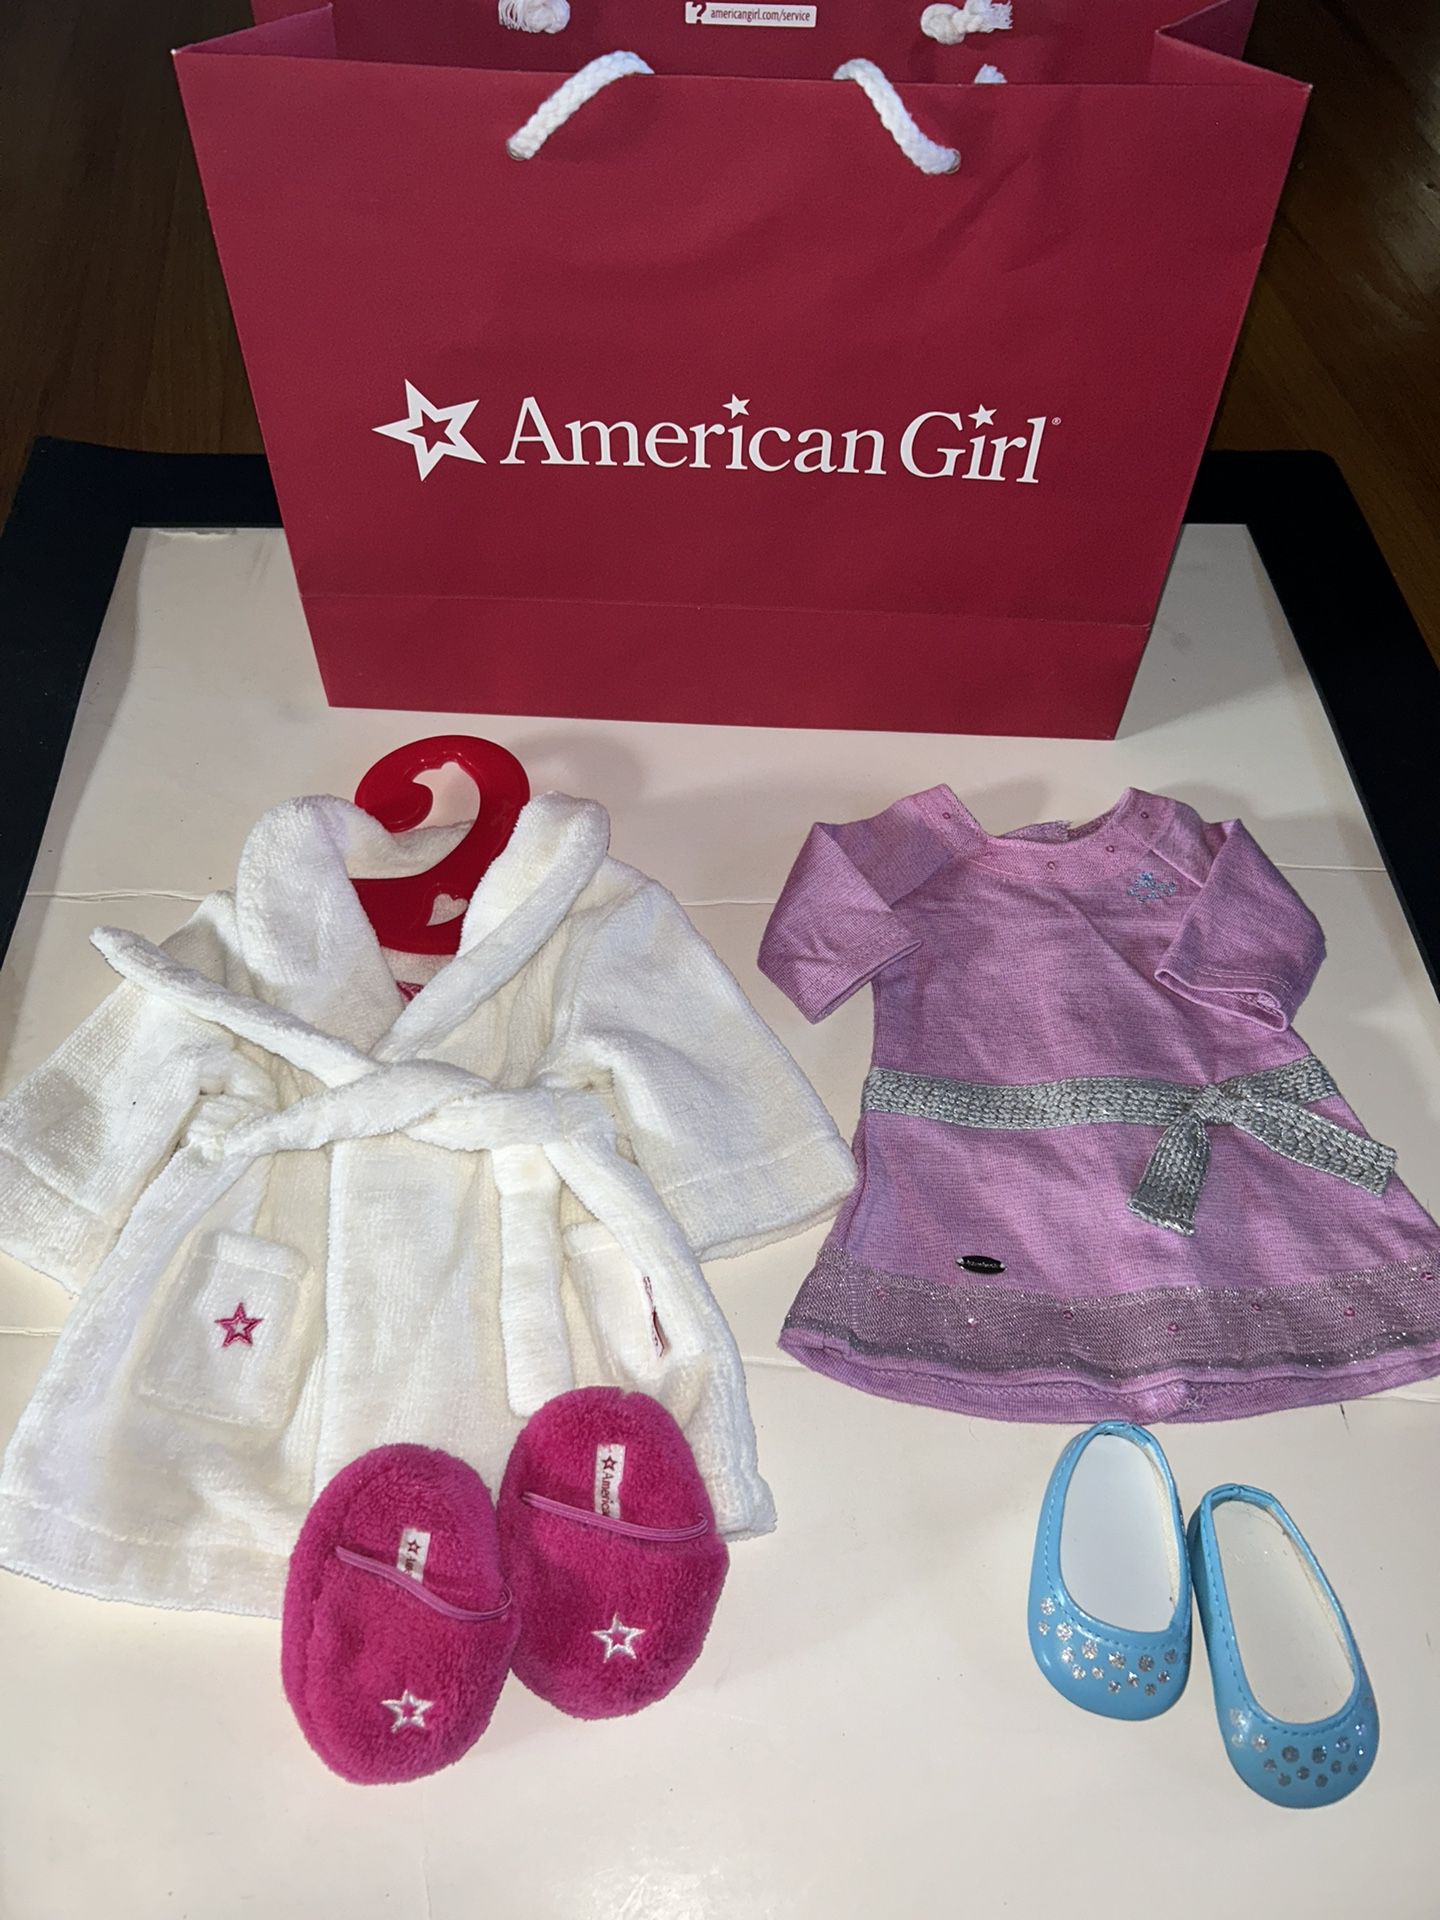 American Girl Doll Spa Bath Robe & Slippers Hotel Set & Knit Dress with Flats